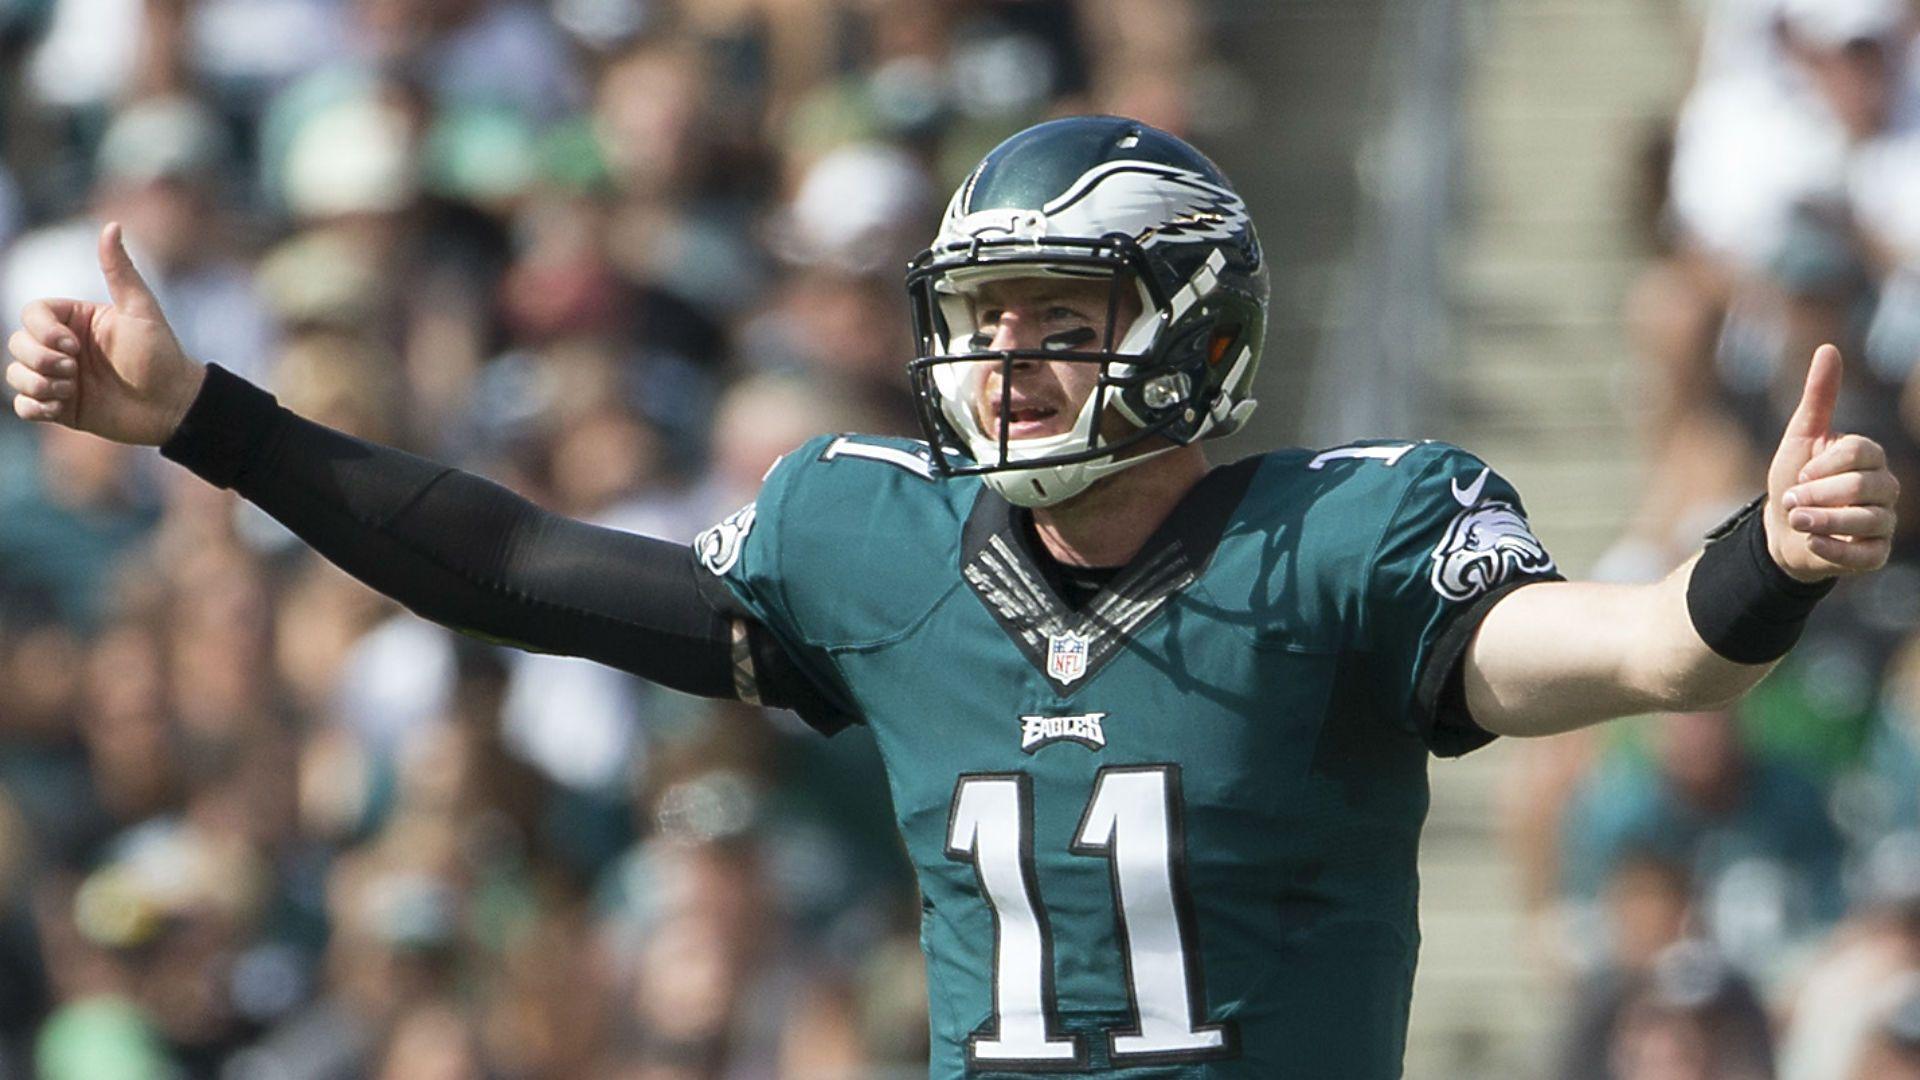 Judgment of Eagles' Carson Wentz is premature and unfair. NFL